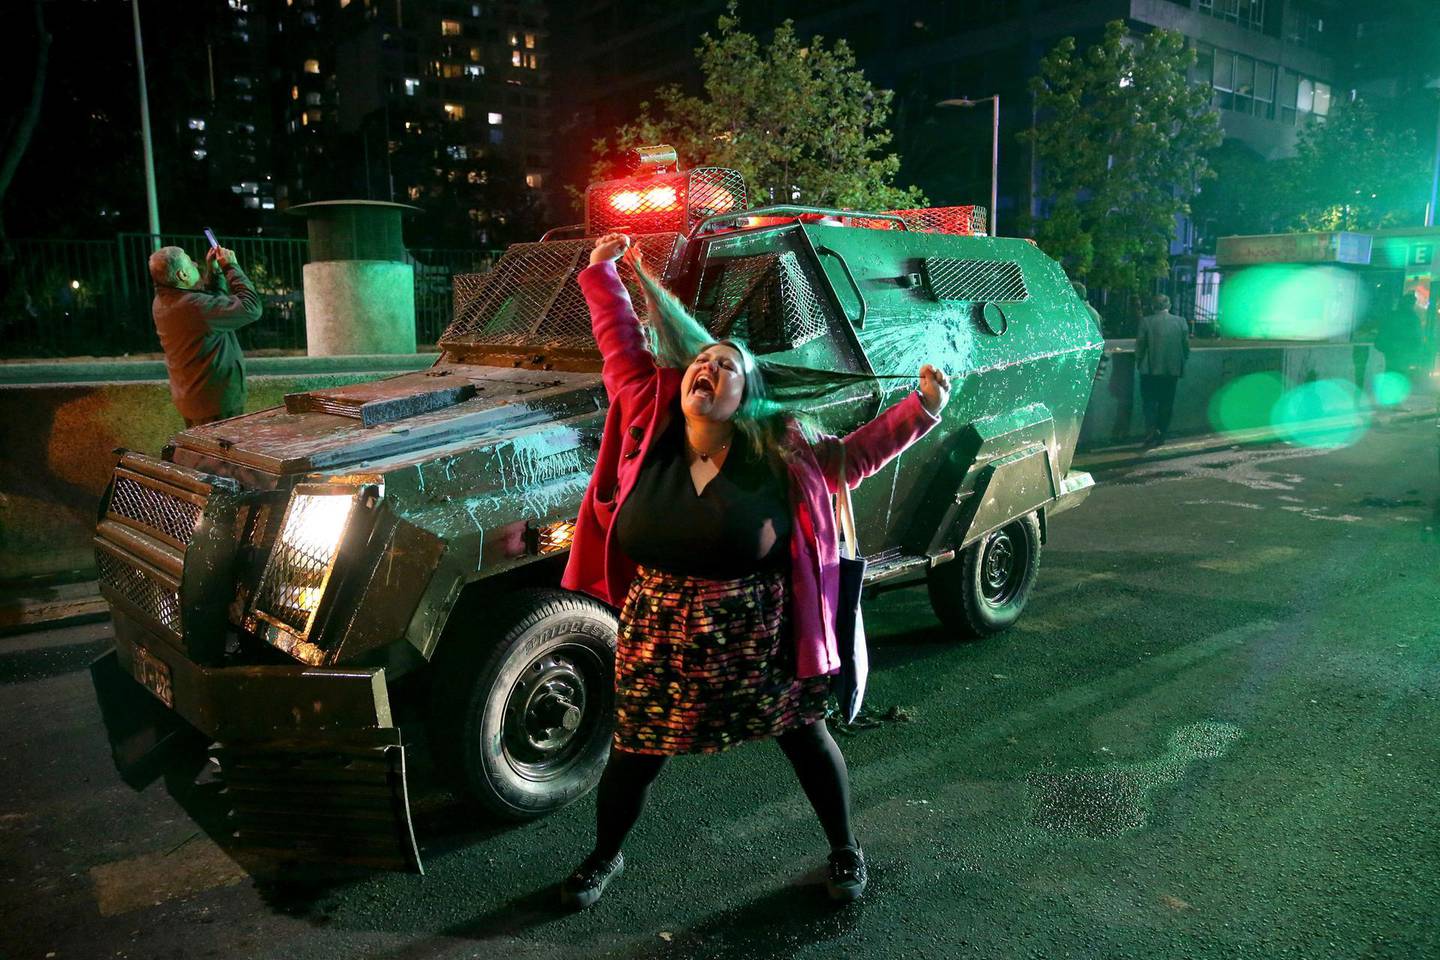 A woman shouts in front of a police truck near the Santa Lucia subway station during a protest against the rising cost of subway and bus fares, in Santiago, Friday, Oct. 18, 2019. (AP Photo/Esteban Felix)